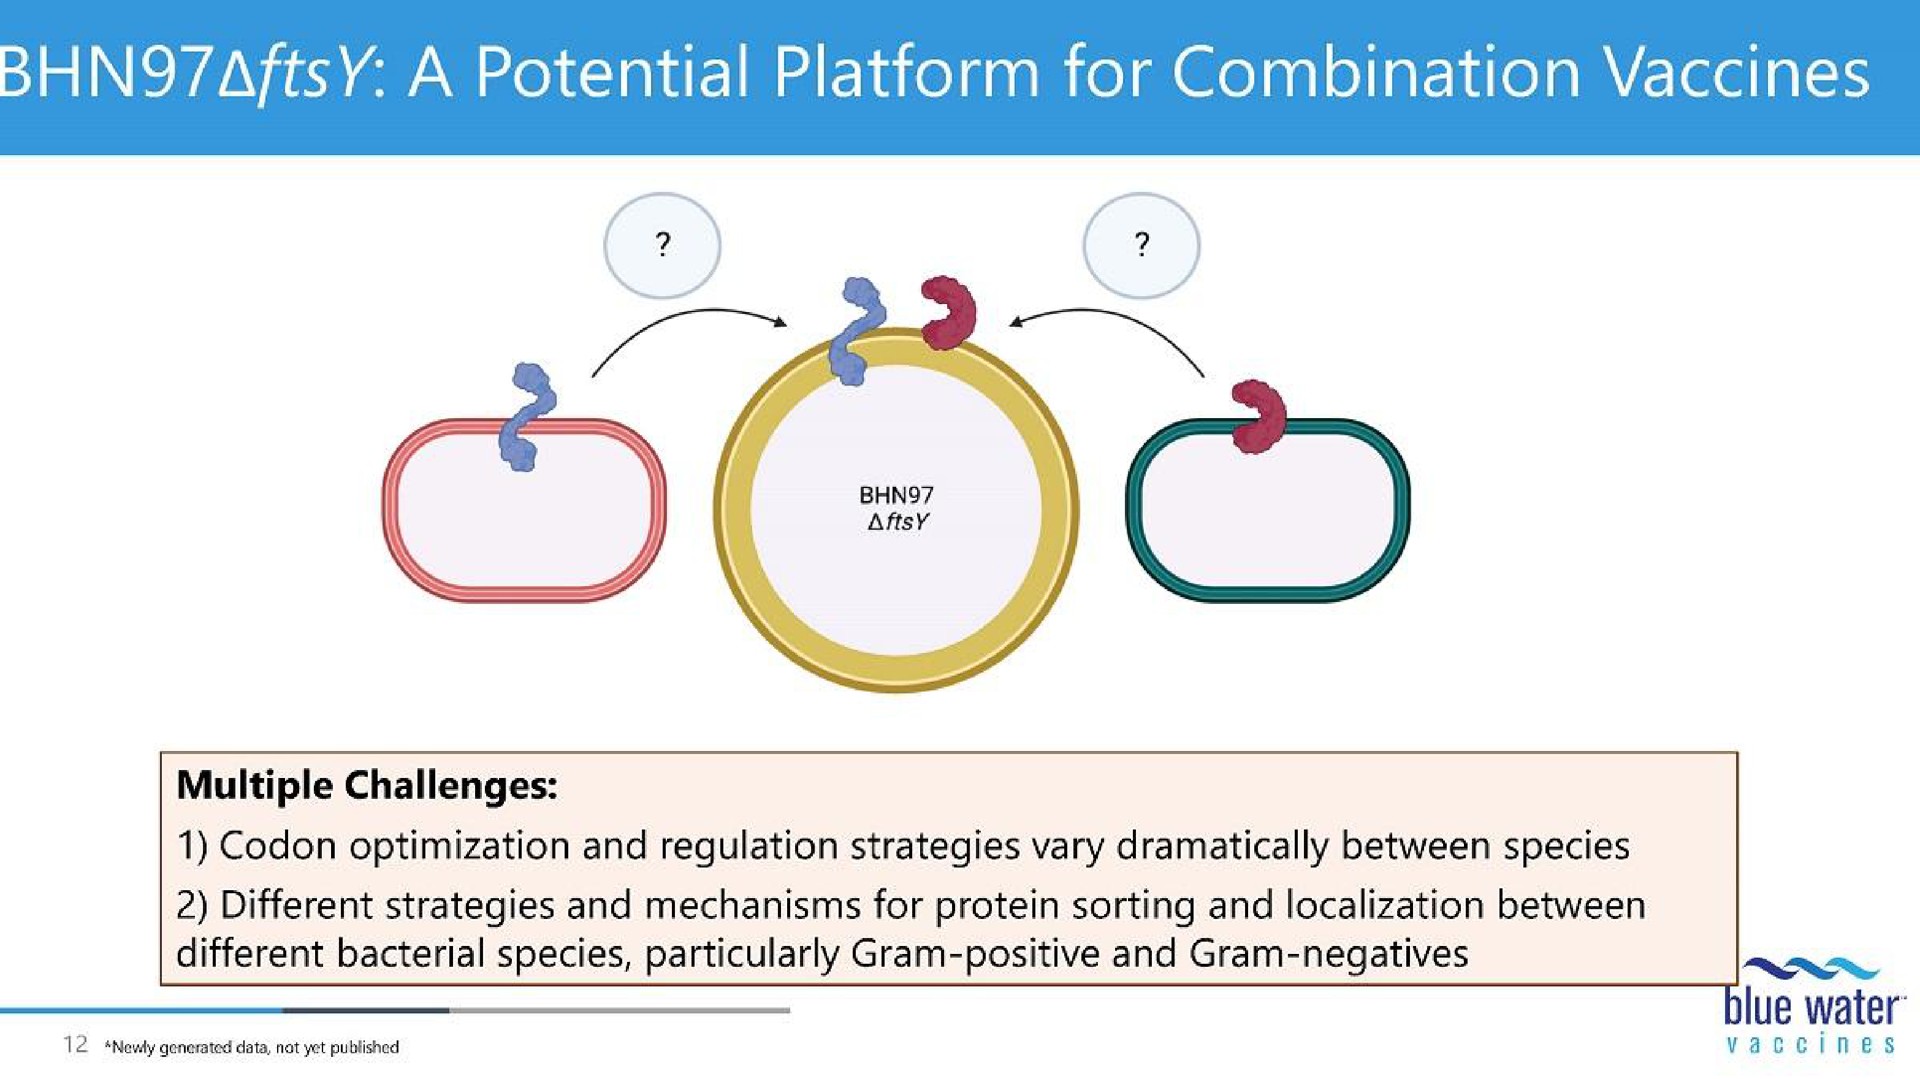 a potential platform for combination vaccines | Blue Water Vaccines